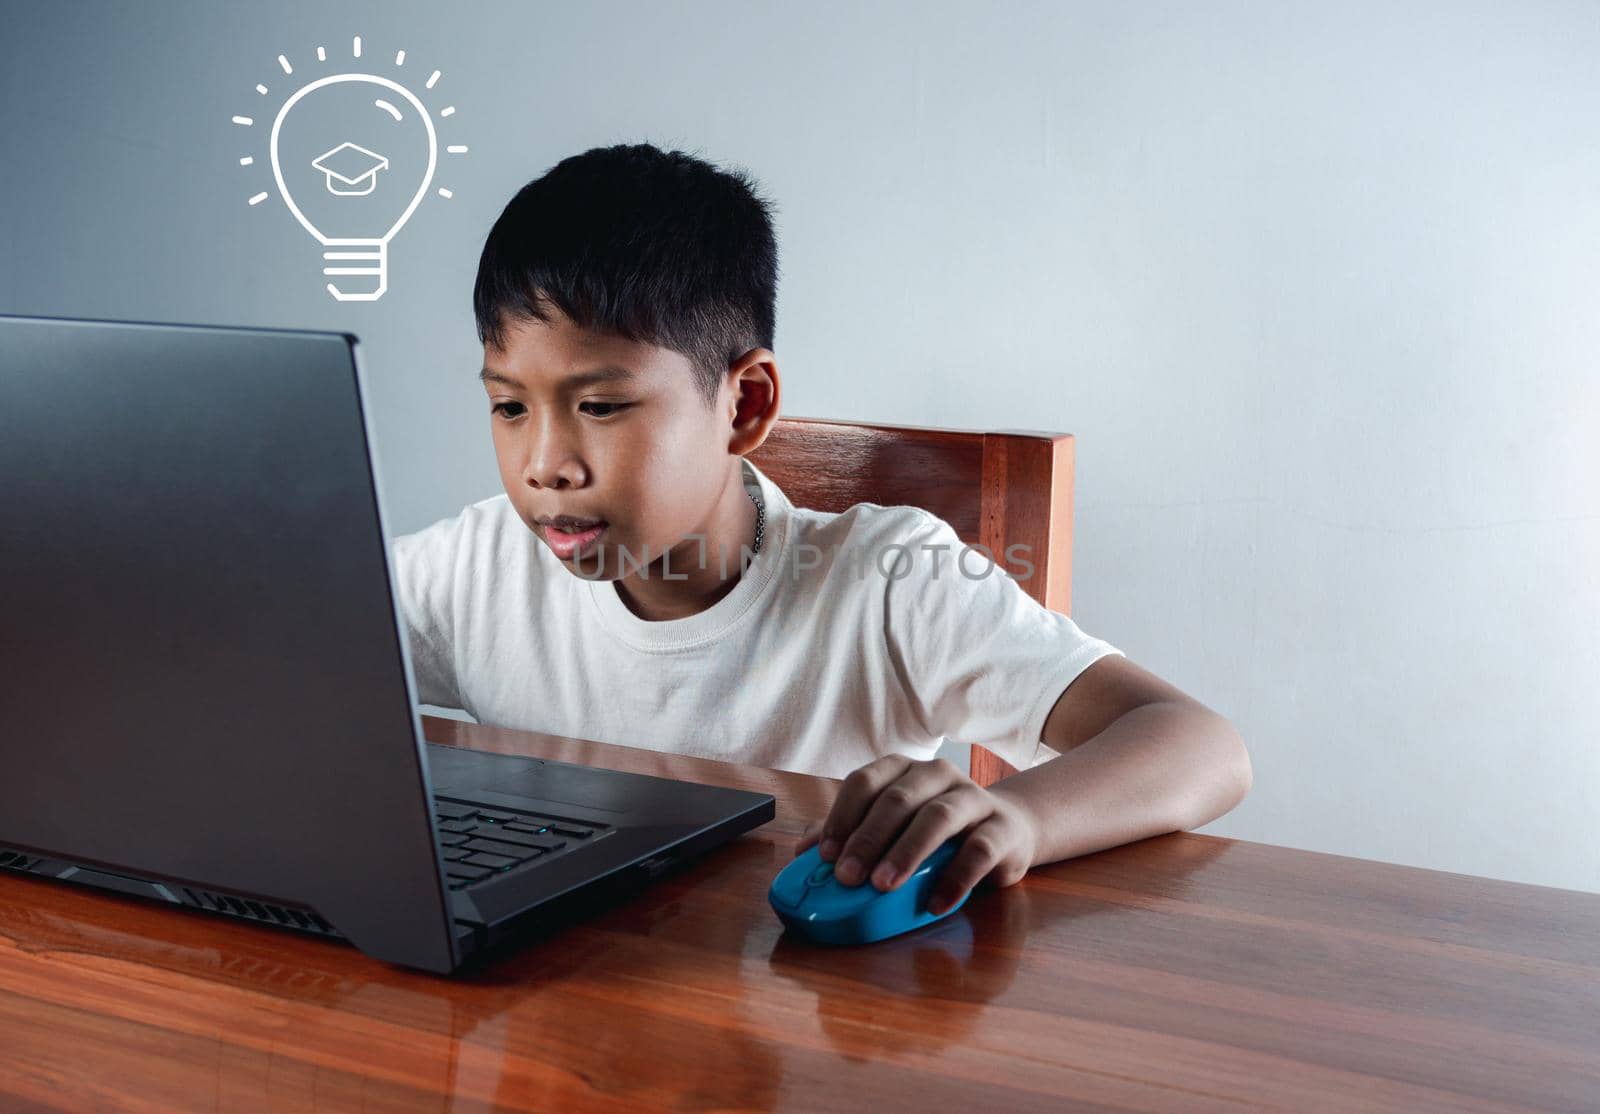 Education concept image. Creative idea and innovation. boy sitting staring at computer and there is a light bulb icon next to it. by Unimages2527